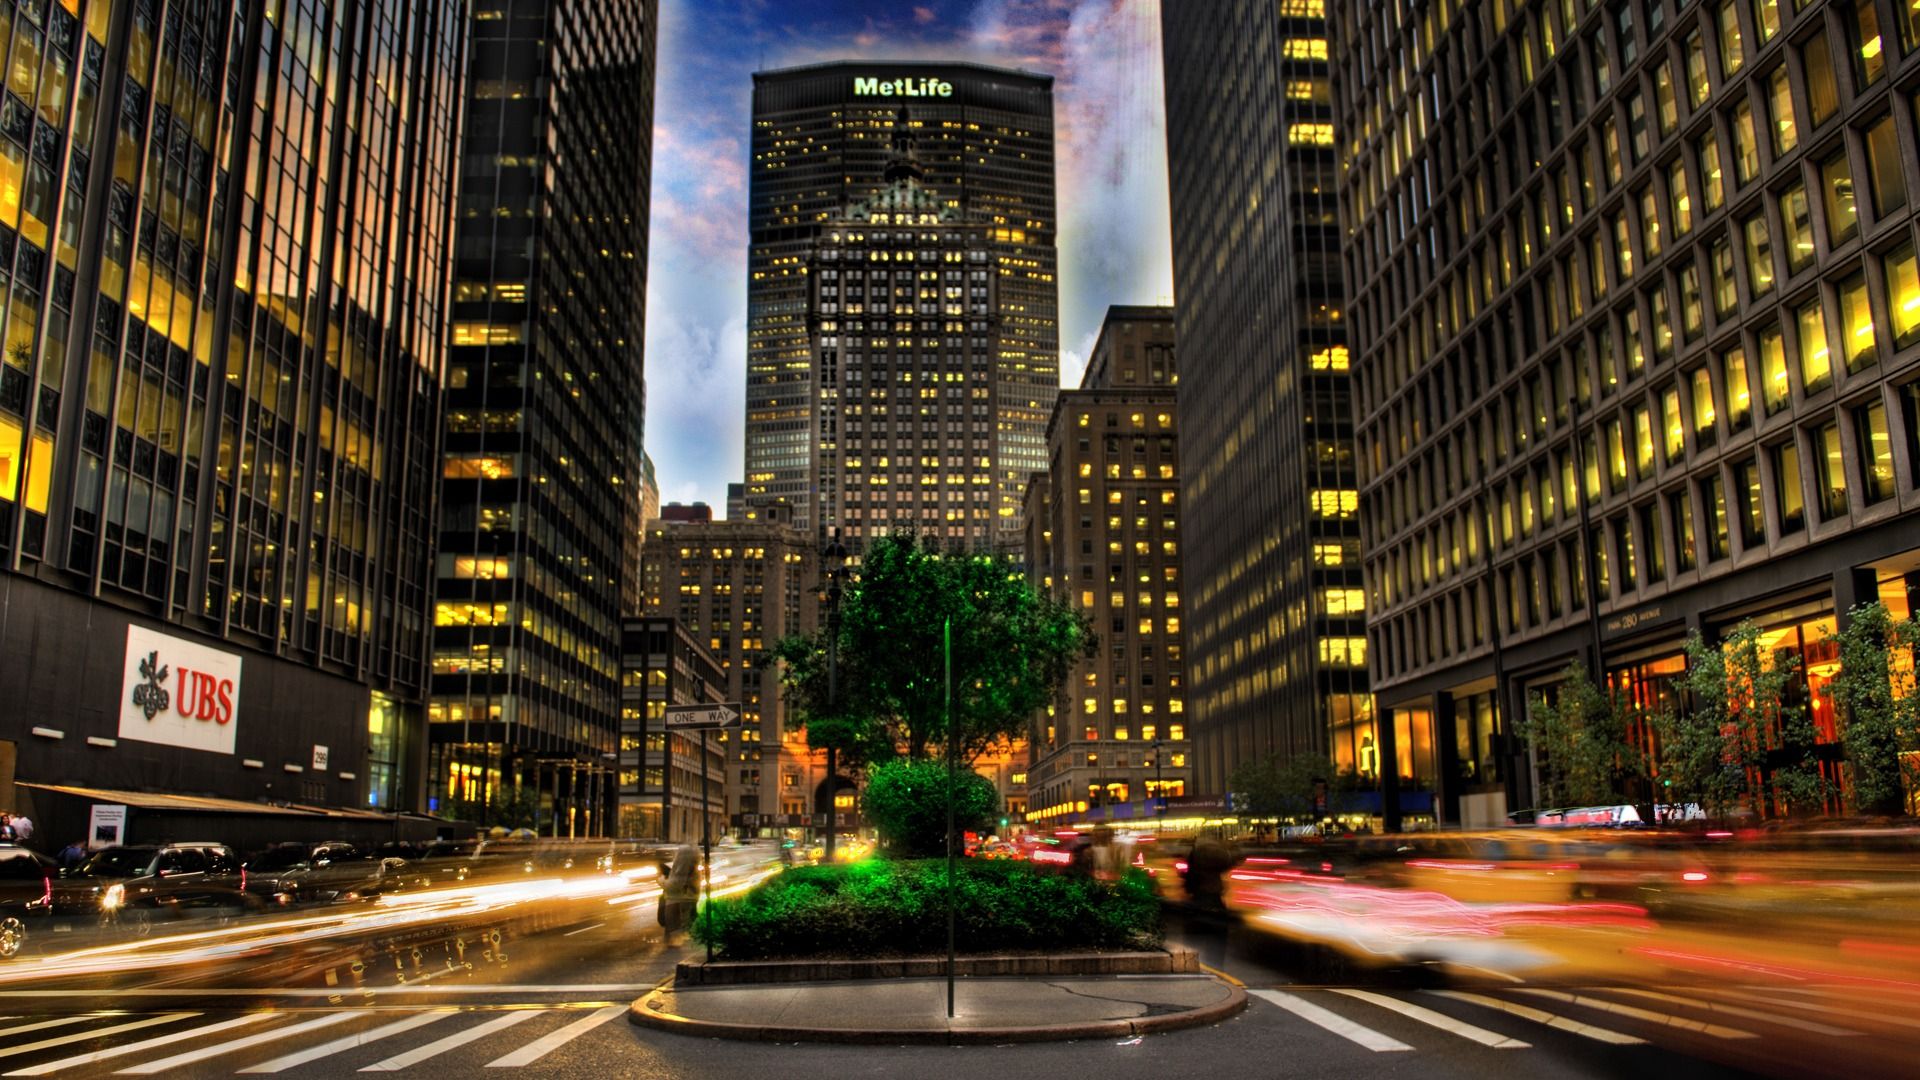 Park Avenue Wallpaper United States World Wallpaper in jpg format for free download